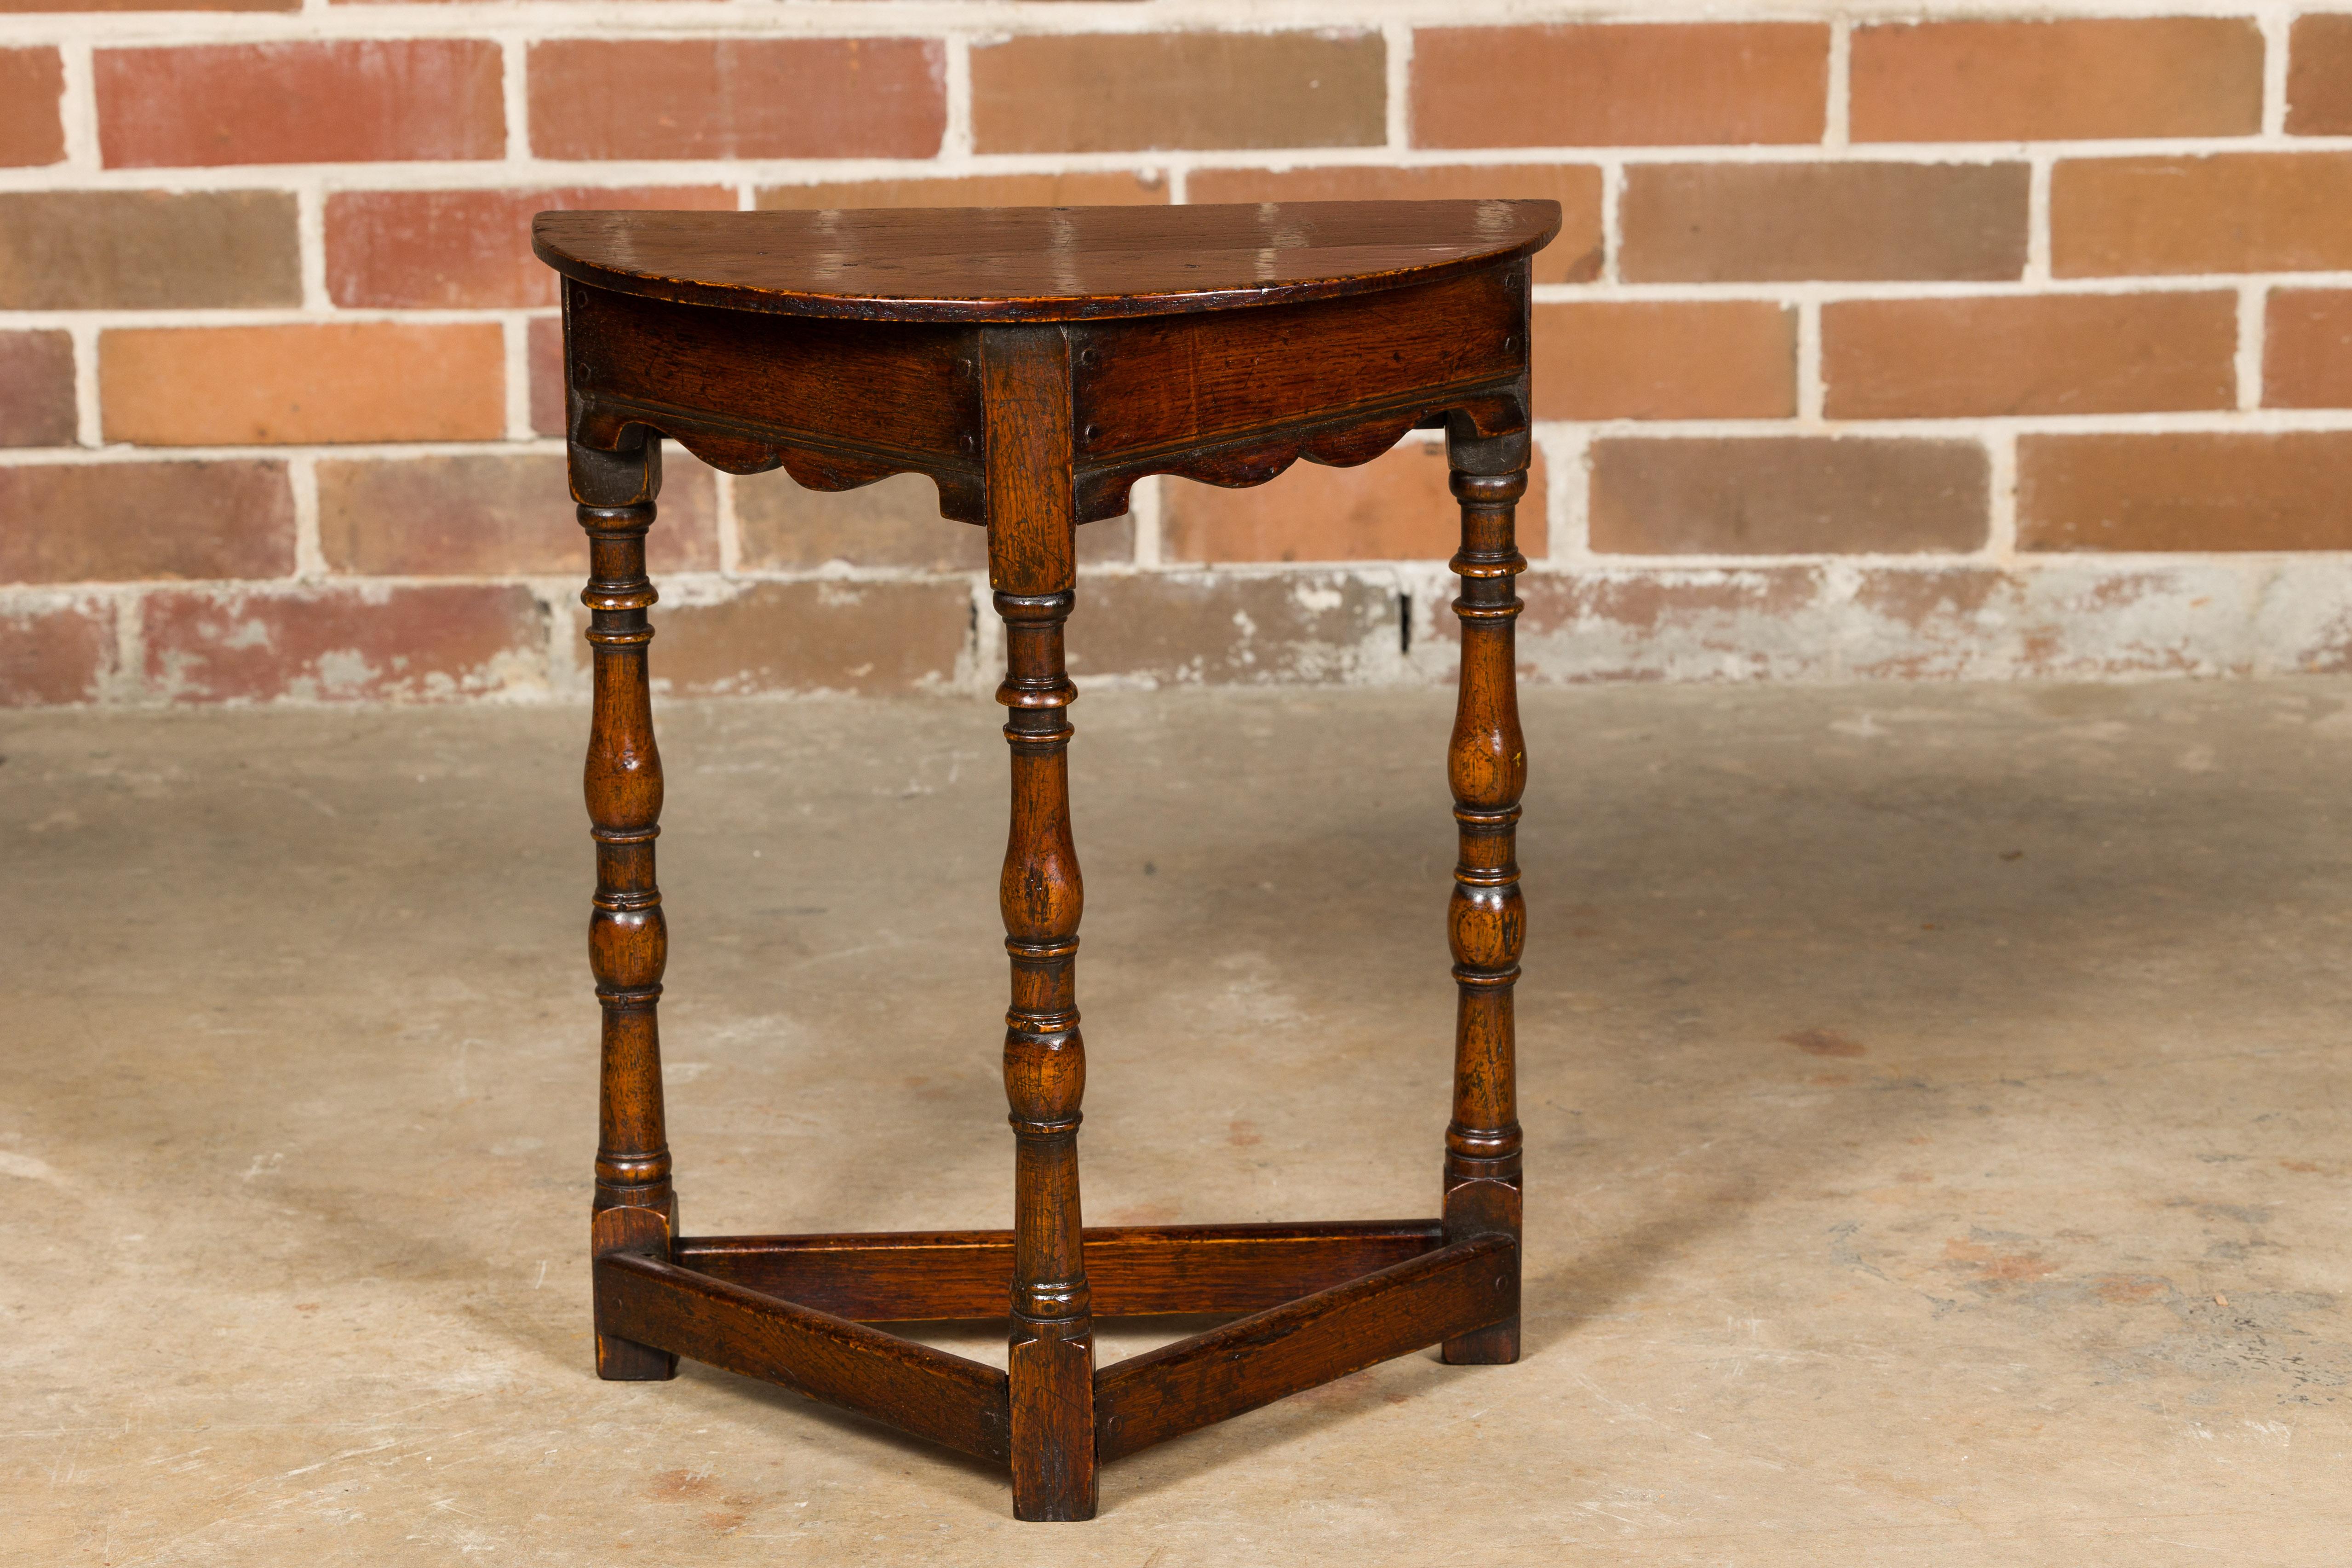 English 19th Century Small Oak Demi-Lune Table with Turned Legs and Carved Apron 5